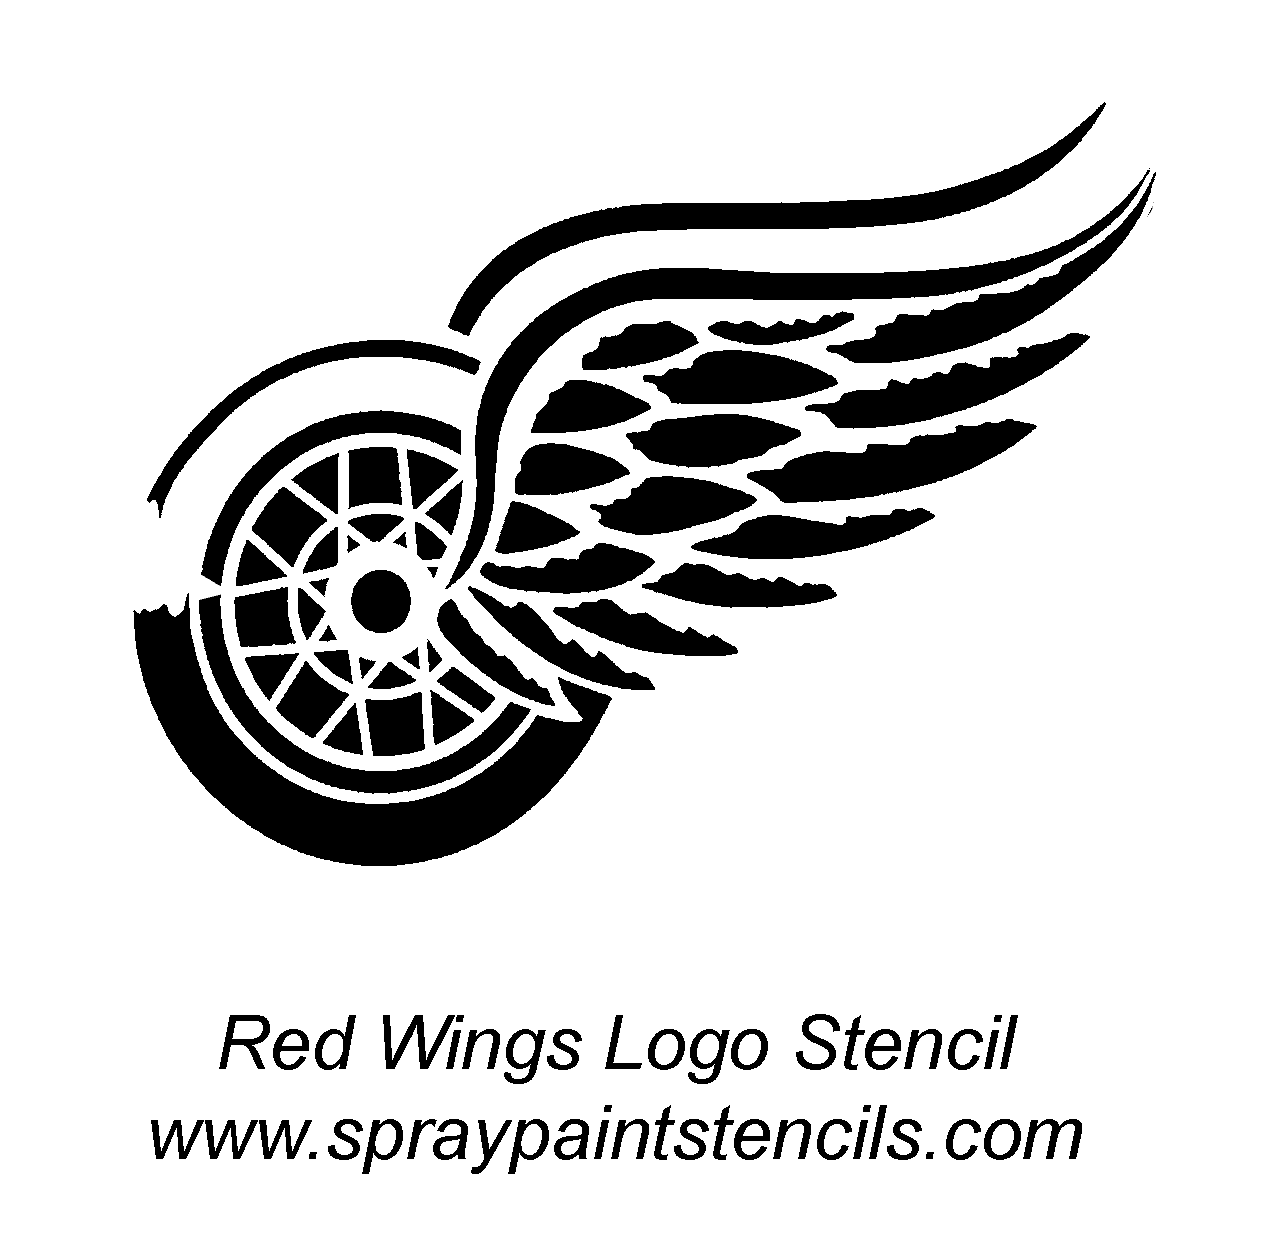 Black and White Detroit Red Wings Logo - My Redwings. Detroit Red Wings